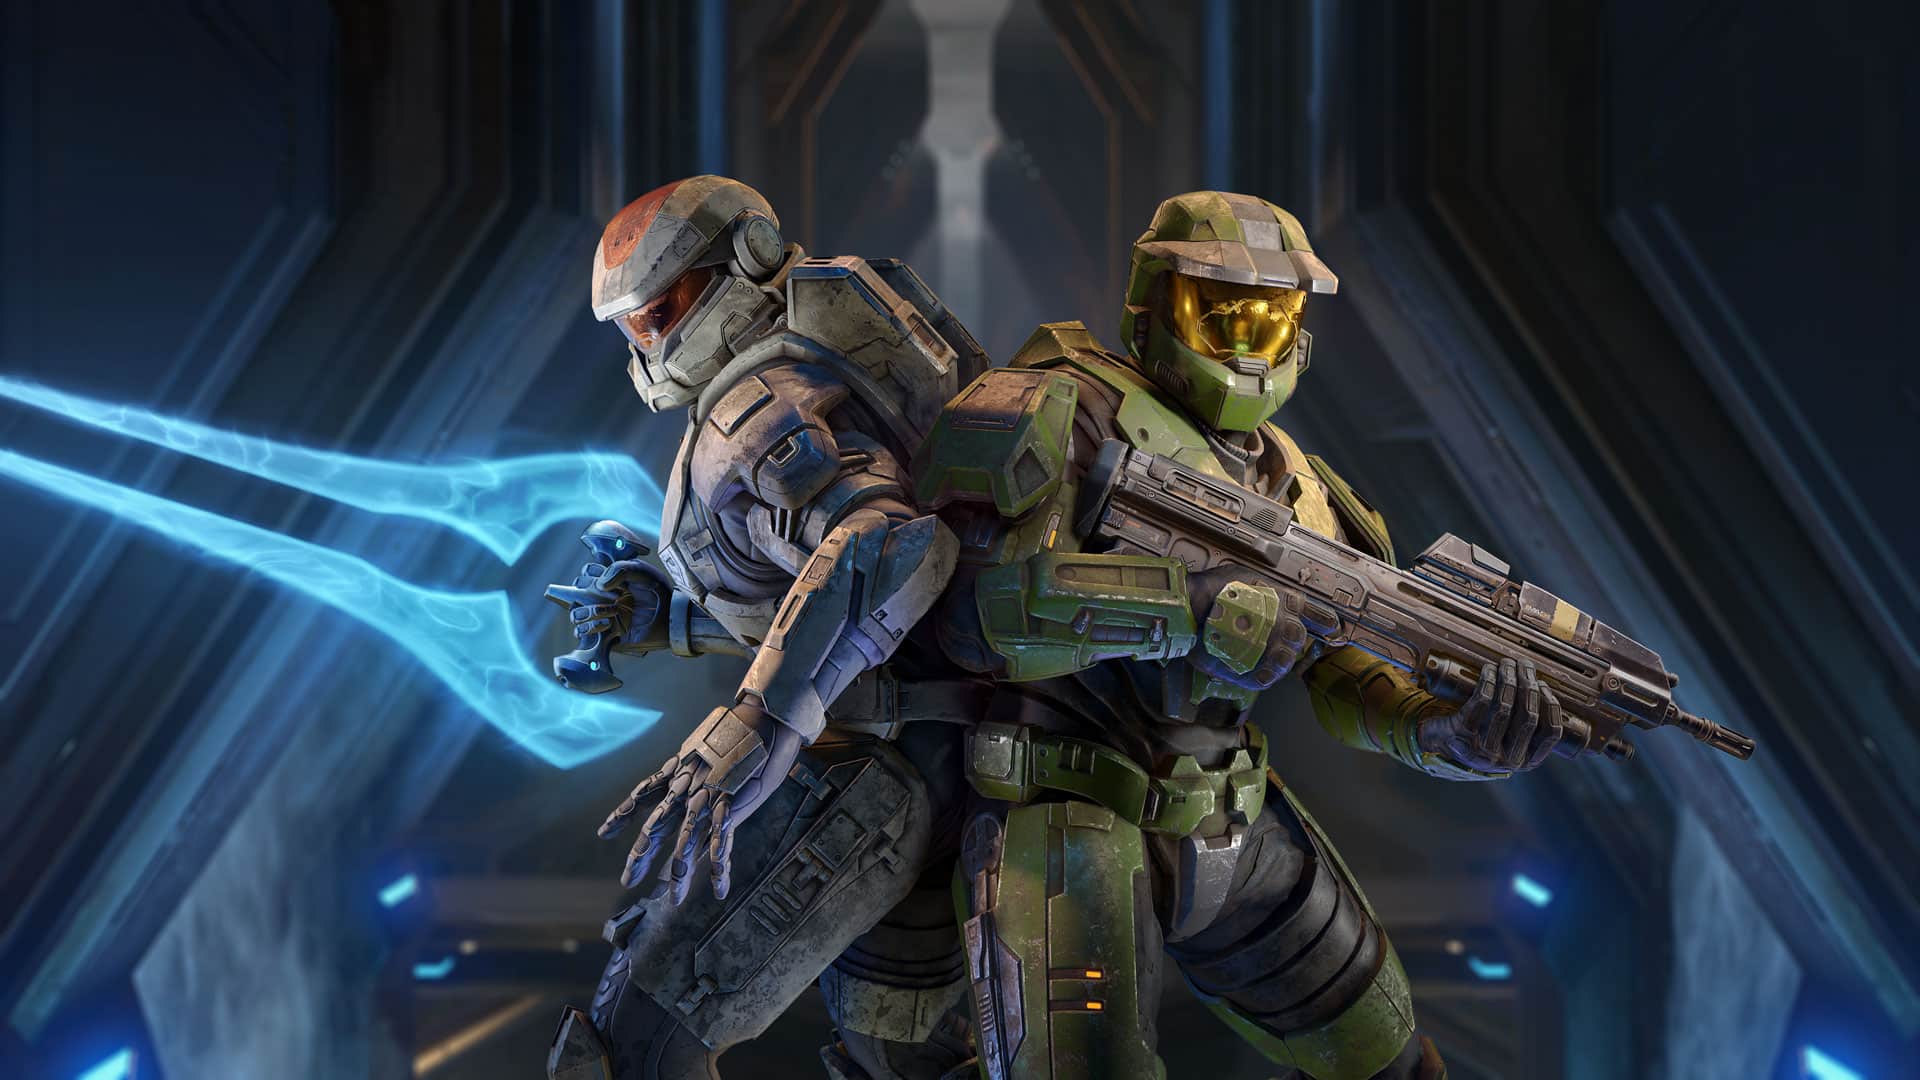 Halo: What Really Happened To Master Chief's Family?